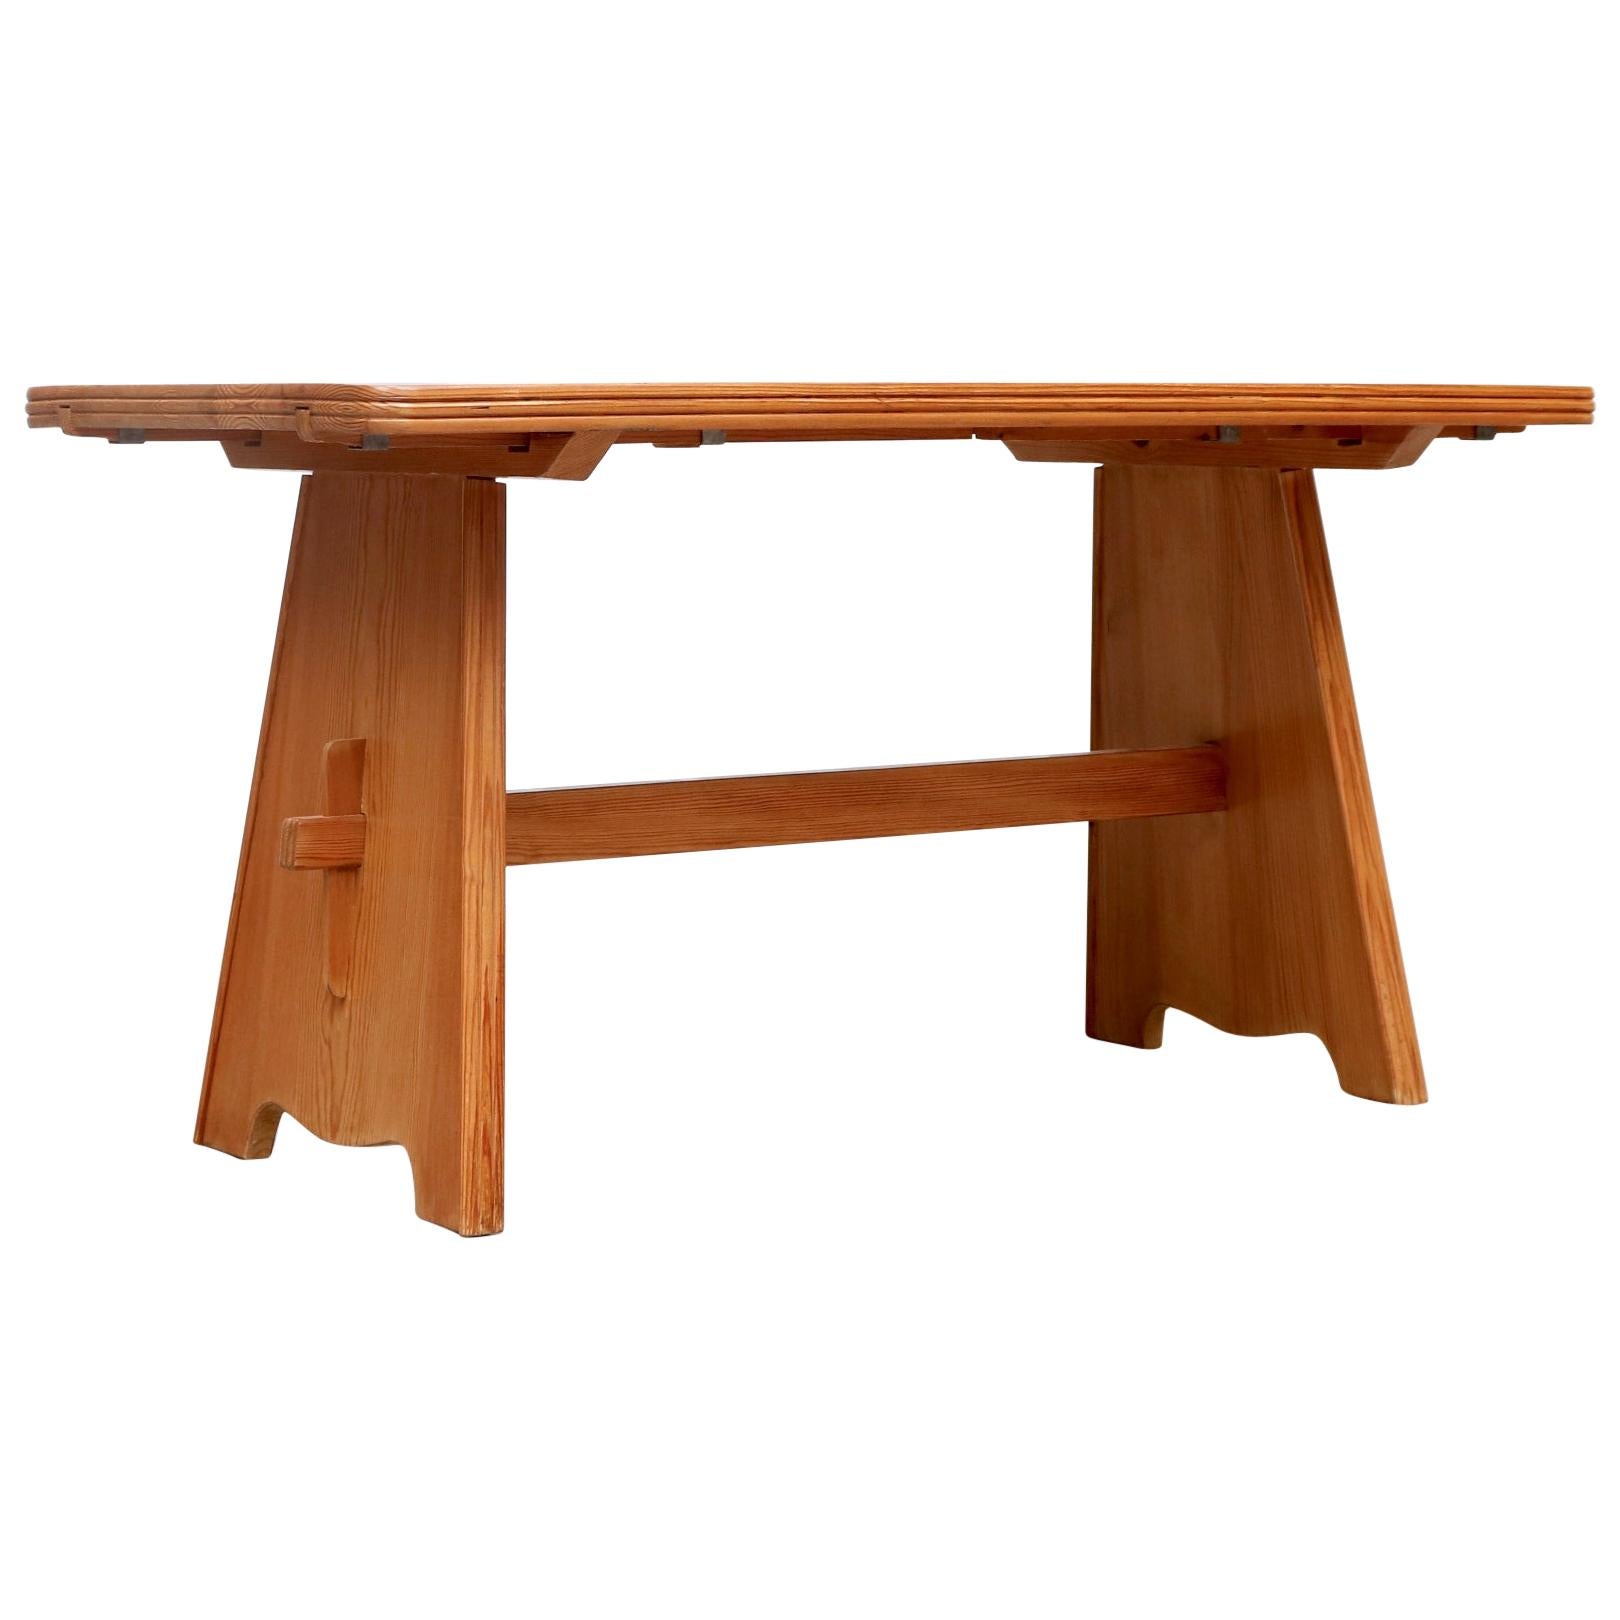 Göran Malmvall Pine Dining Table with Leaves